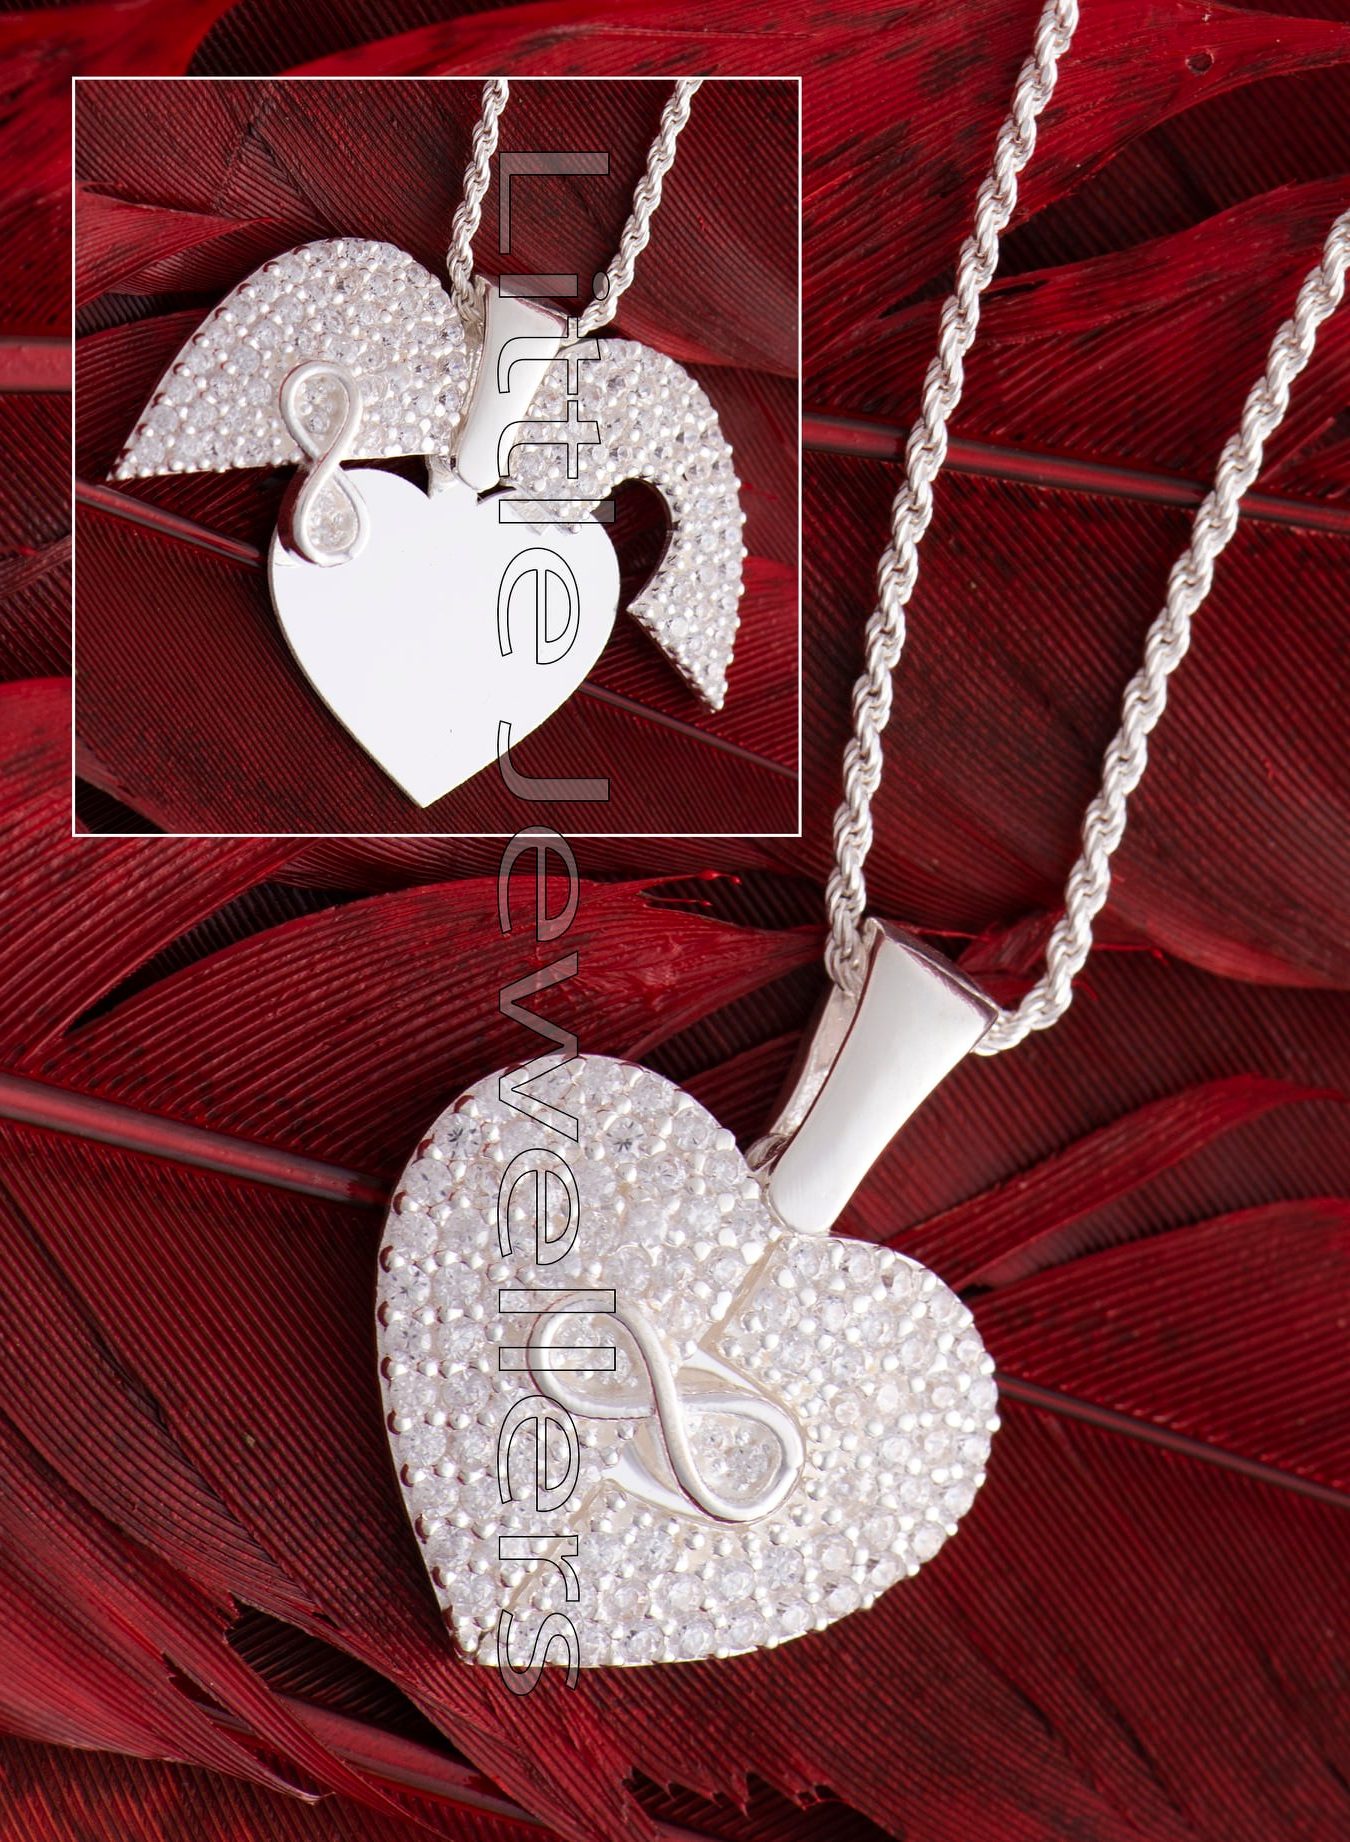 Personalized 3D Photo Crystal Necklace | Customized 3D Pendant with  Engraved Picture